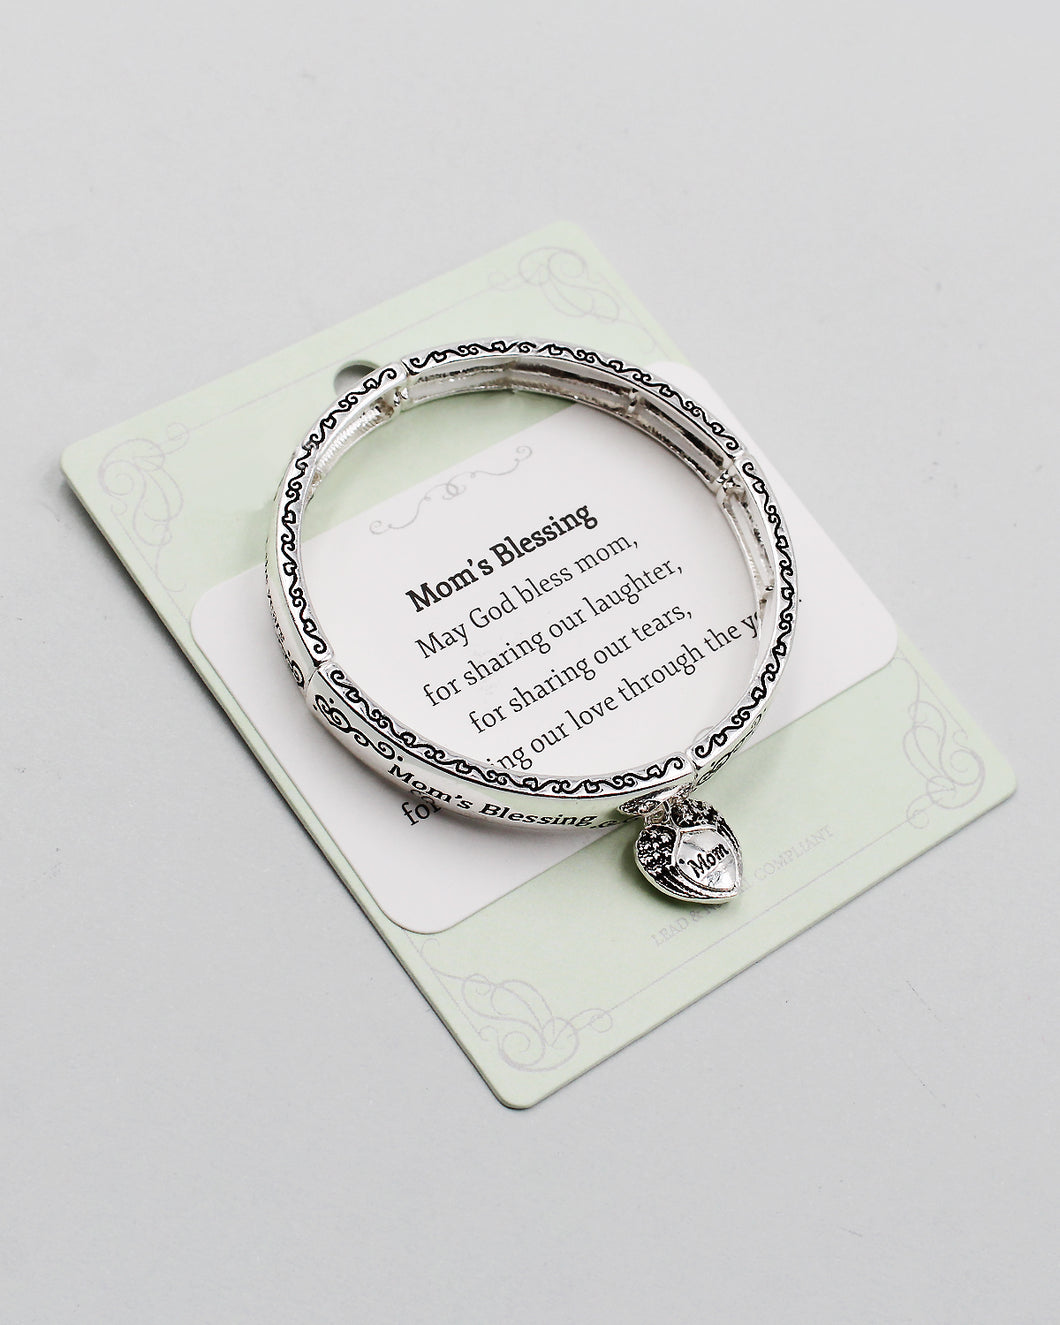 Mom's Blessing Stretch Bangle Bracelet with Charm